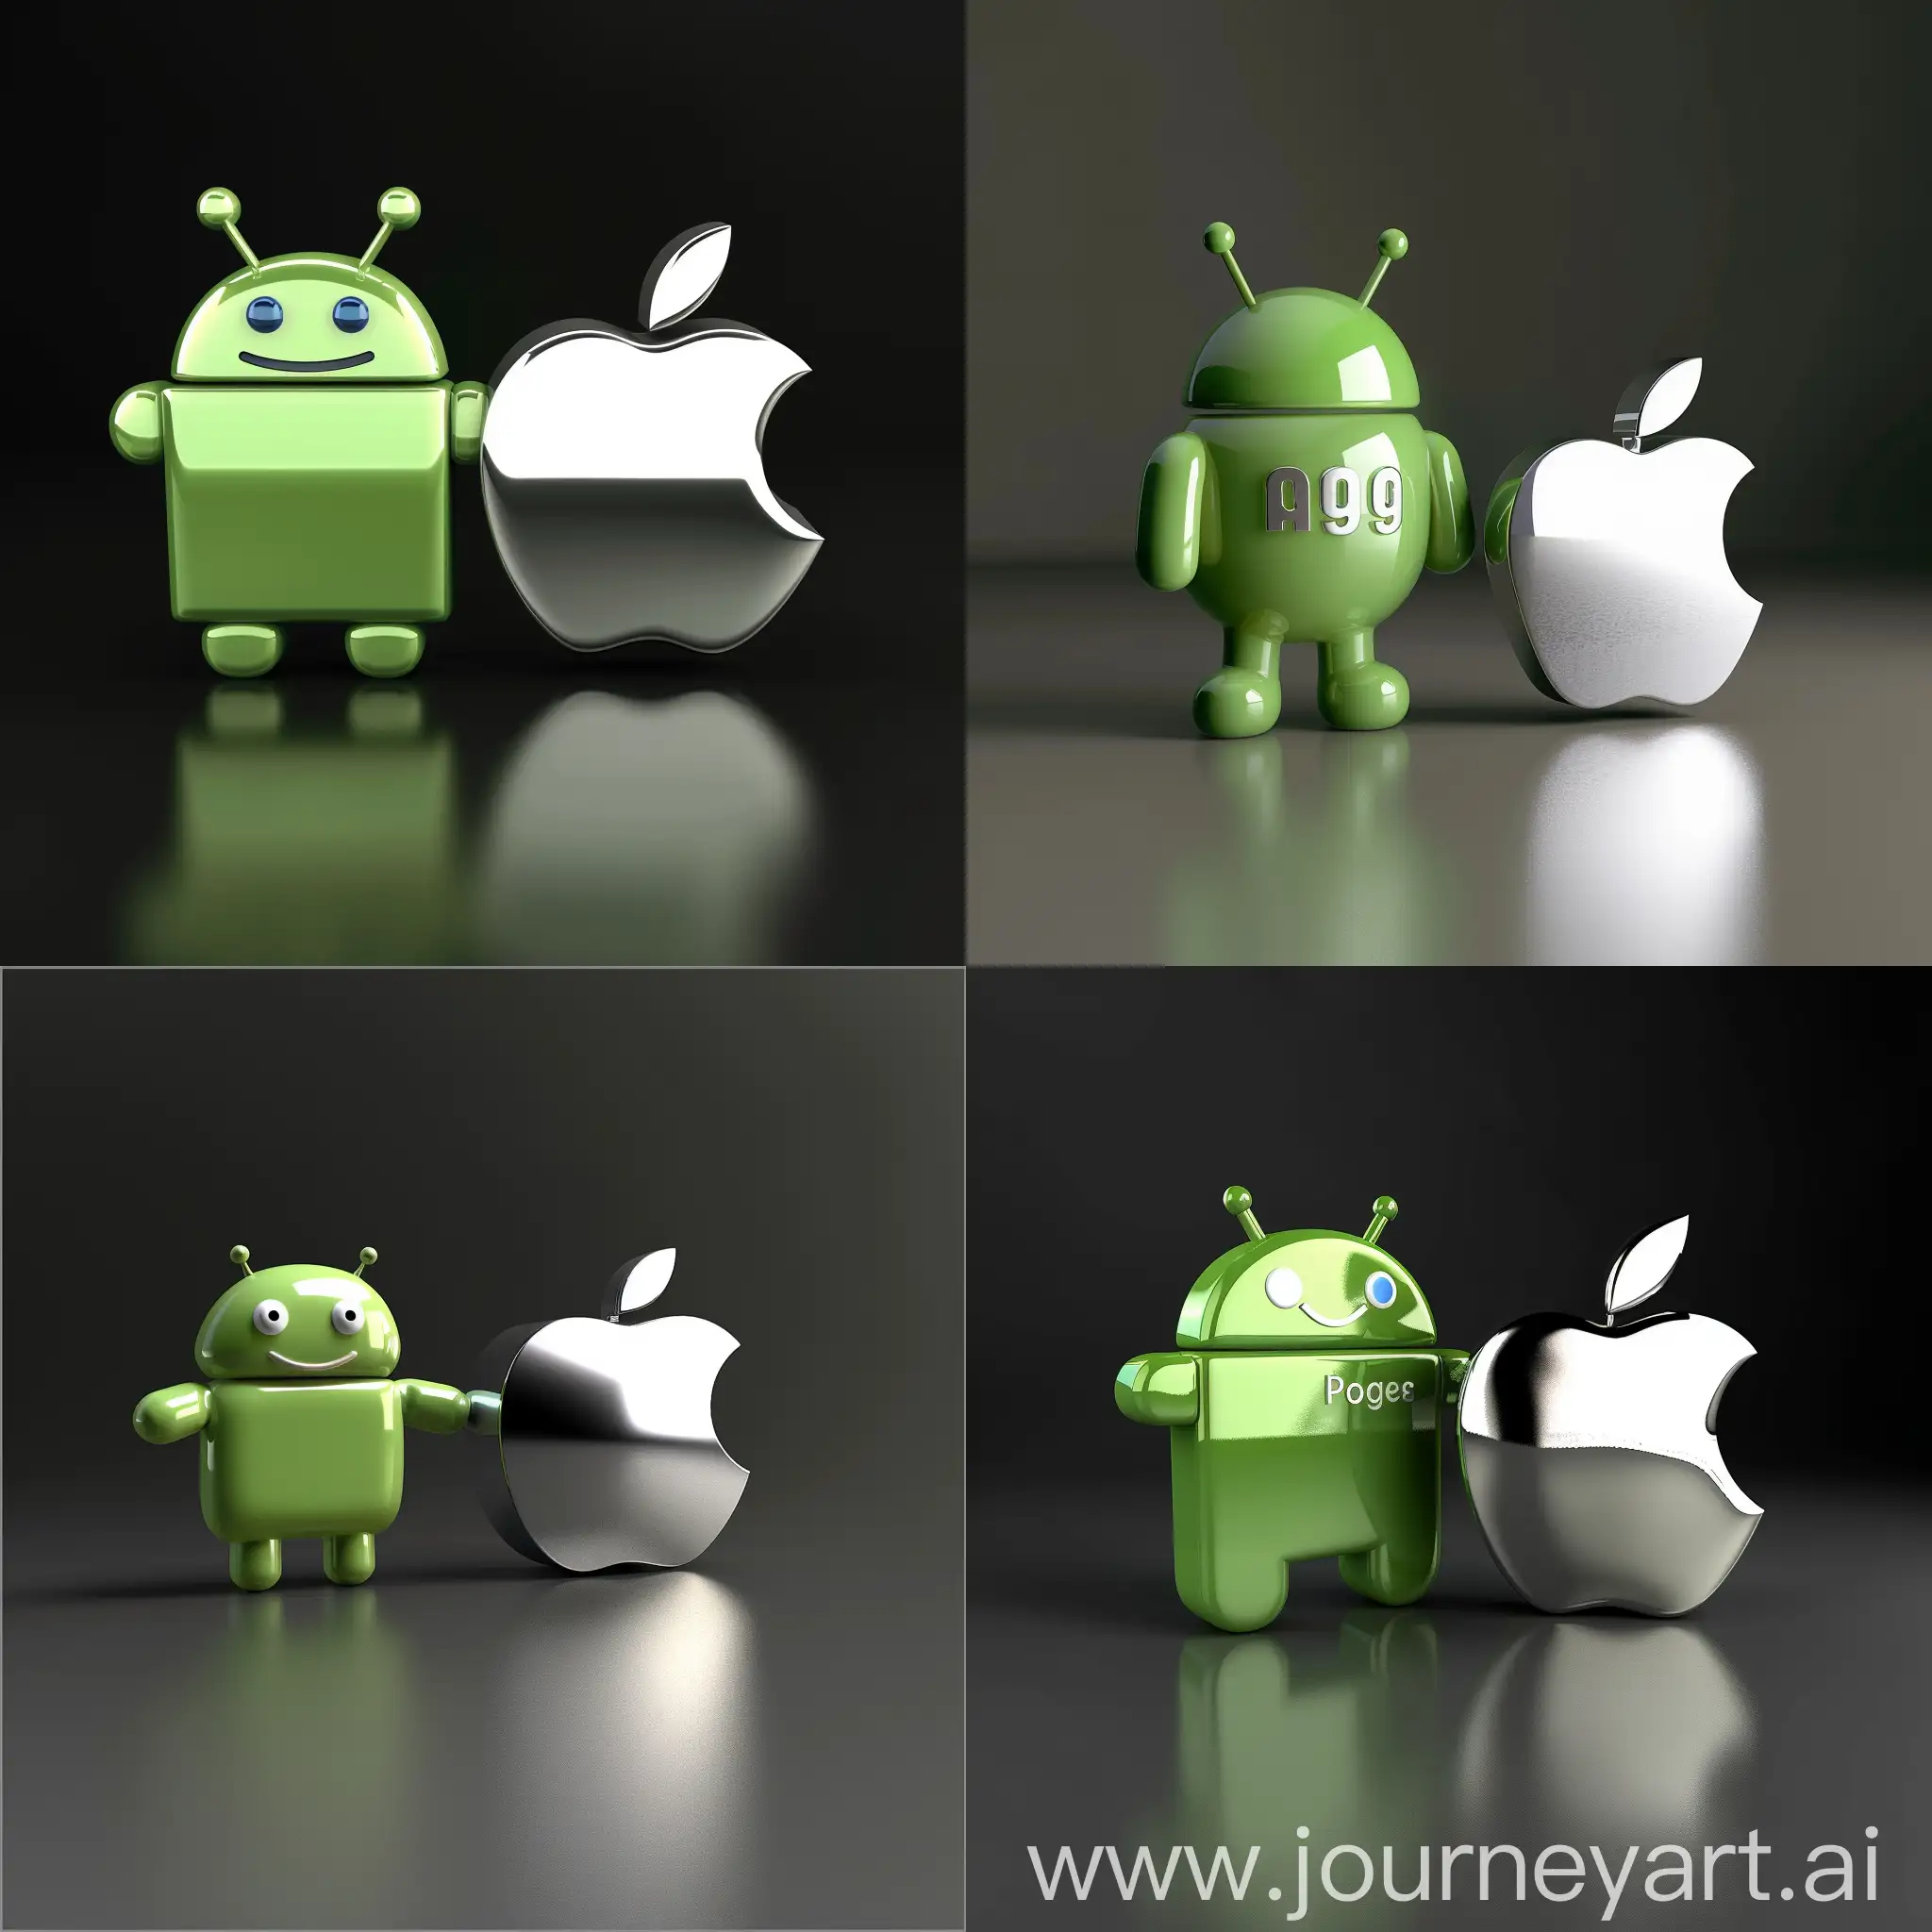 square image 1080 x 1080 px, background color #F7F4E8, 3D icon of green Android and silver Apple icon, picture is symbolising positive relationship and friendship between Apple and Android companies